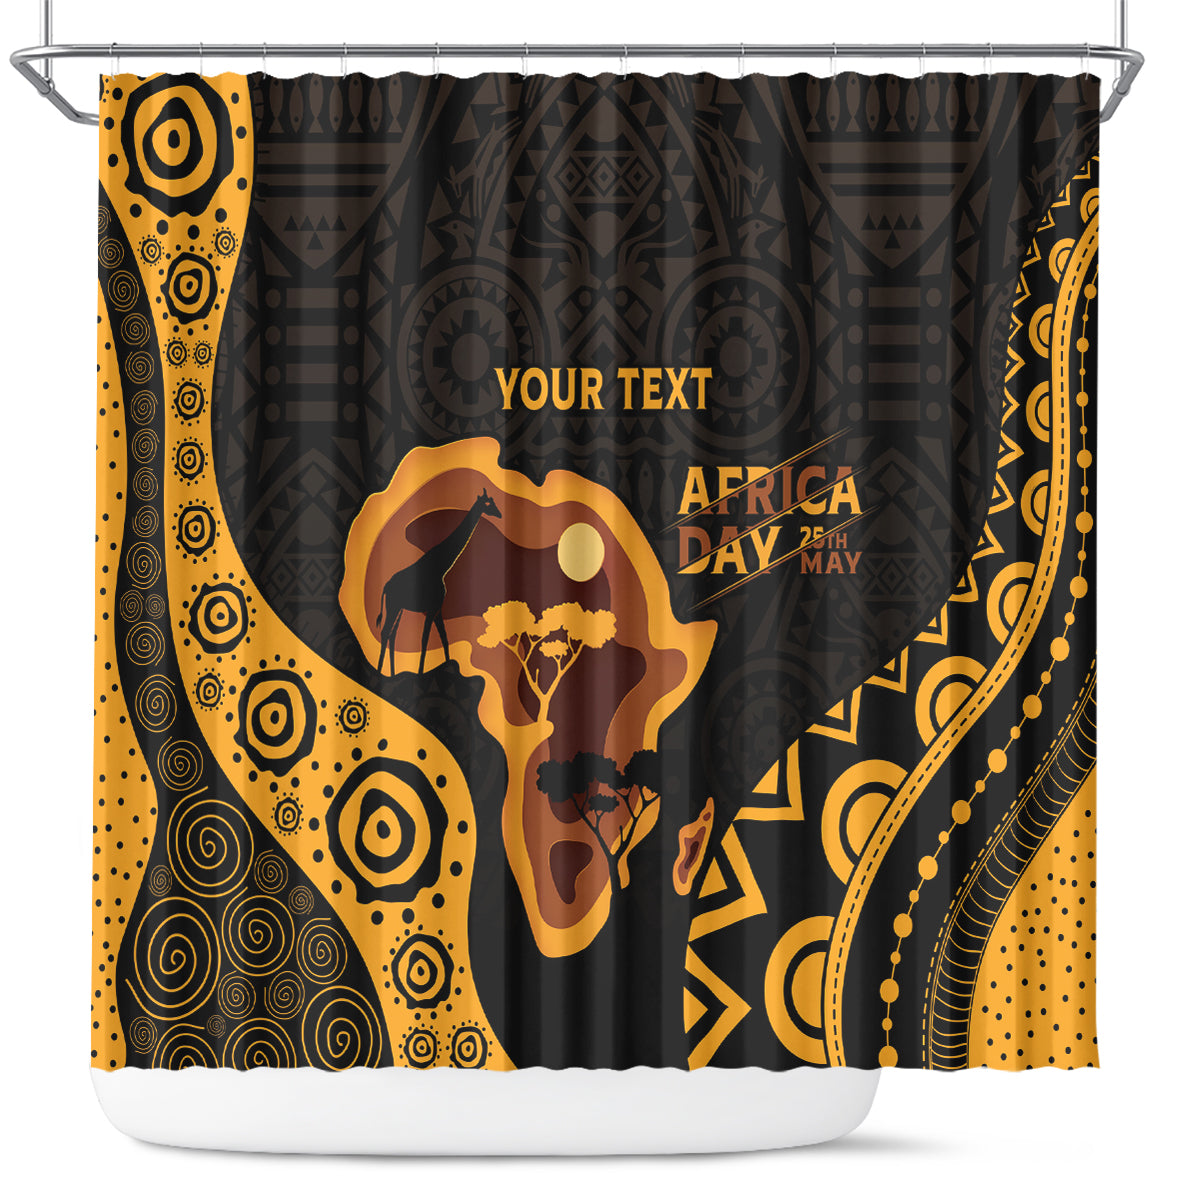 Africa Day Personalized Shower Curtain Ethnic Retro Style